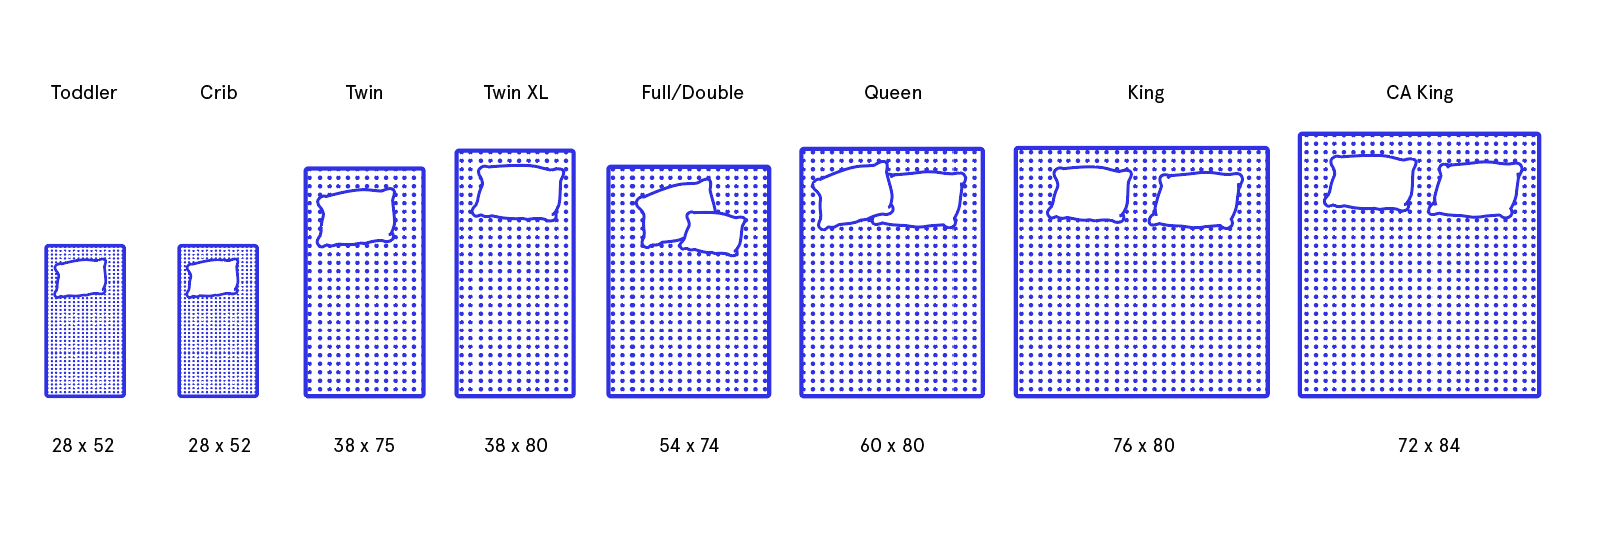 typical full size mattress dimensions